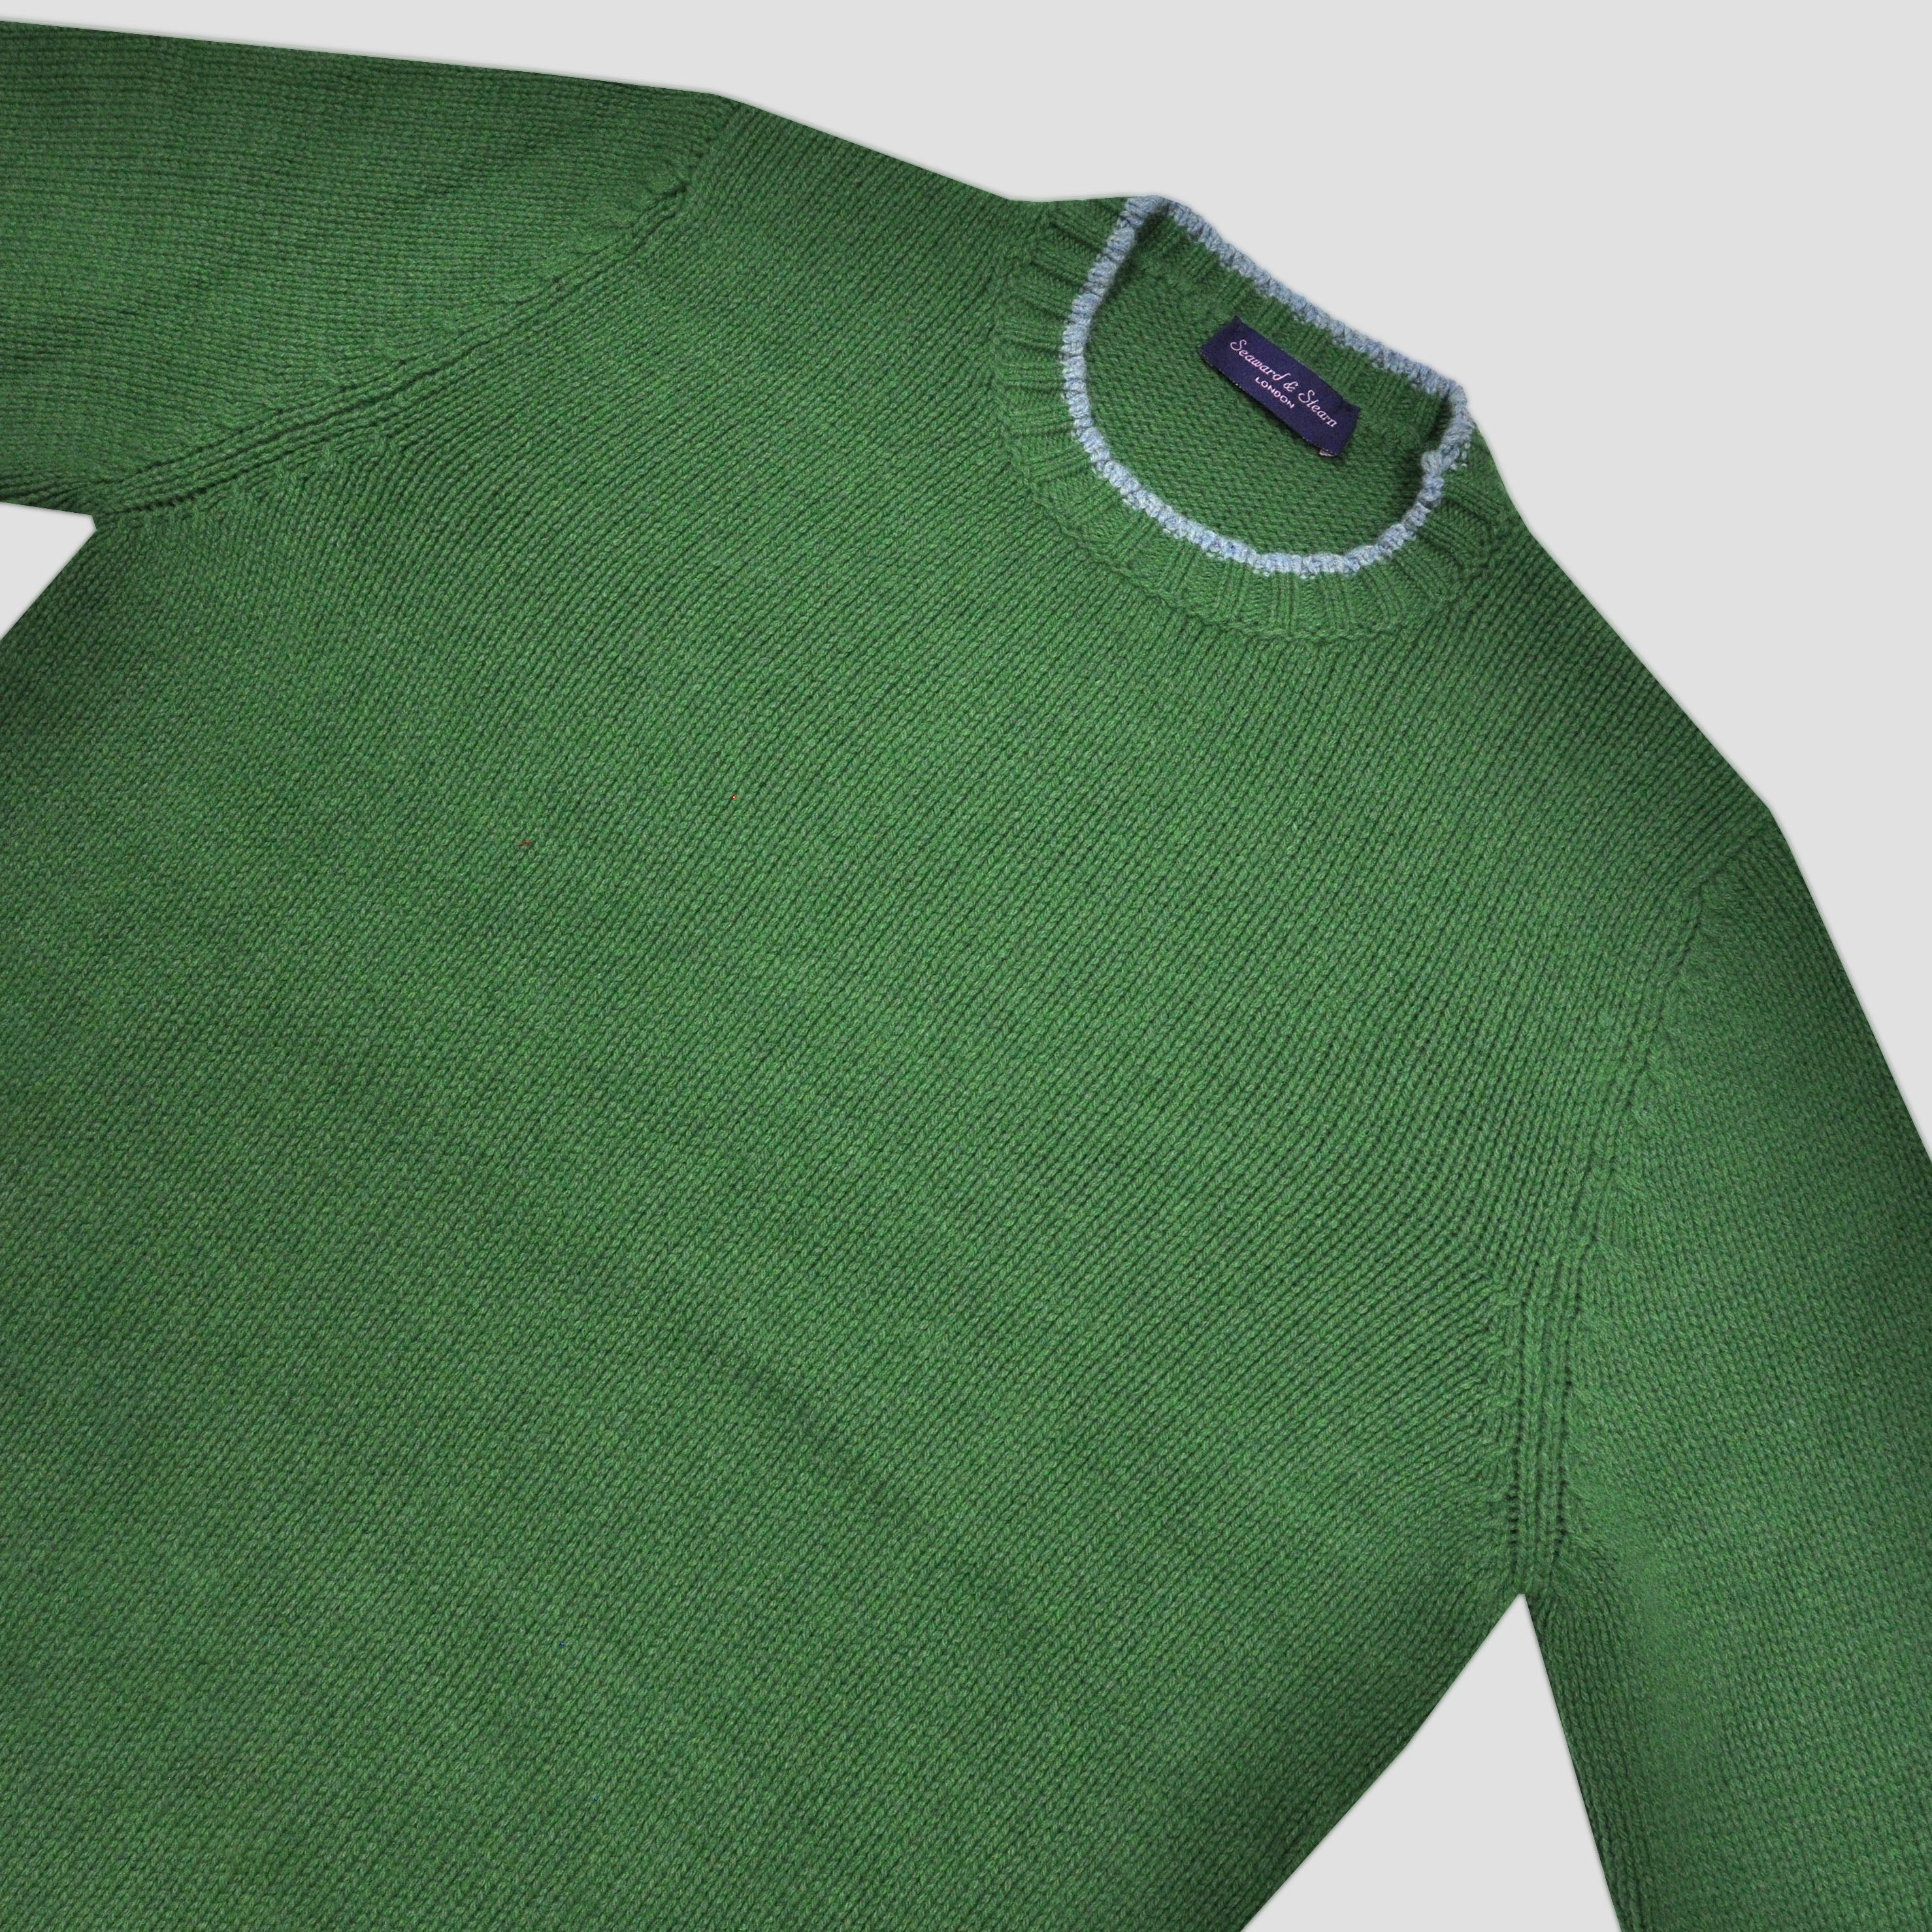 Yak's Wool Crew Neck Jumper in Lawn Green with Sky Blue Trim